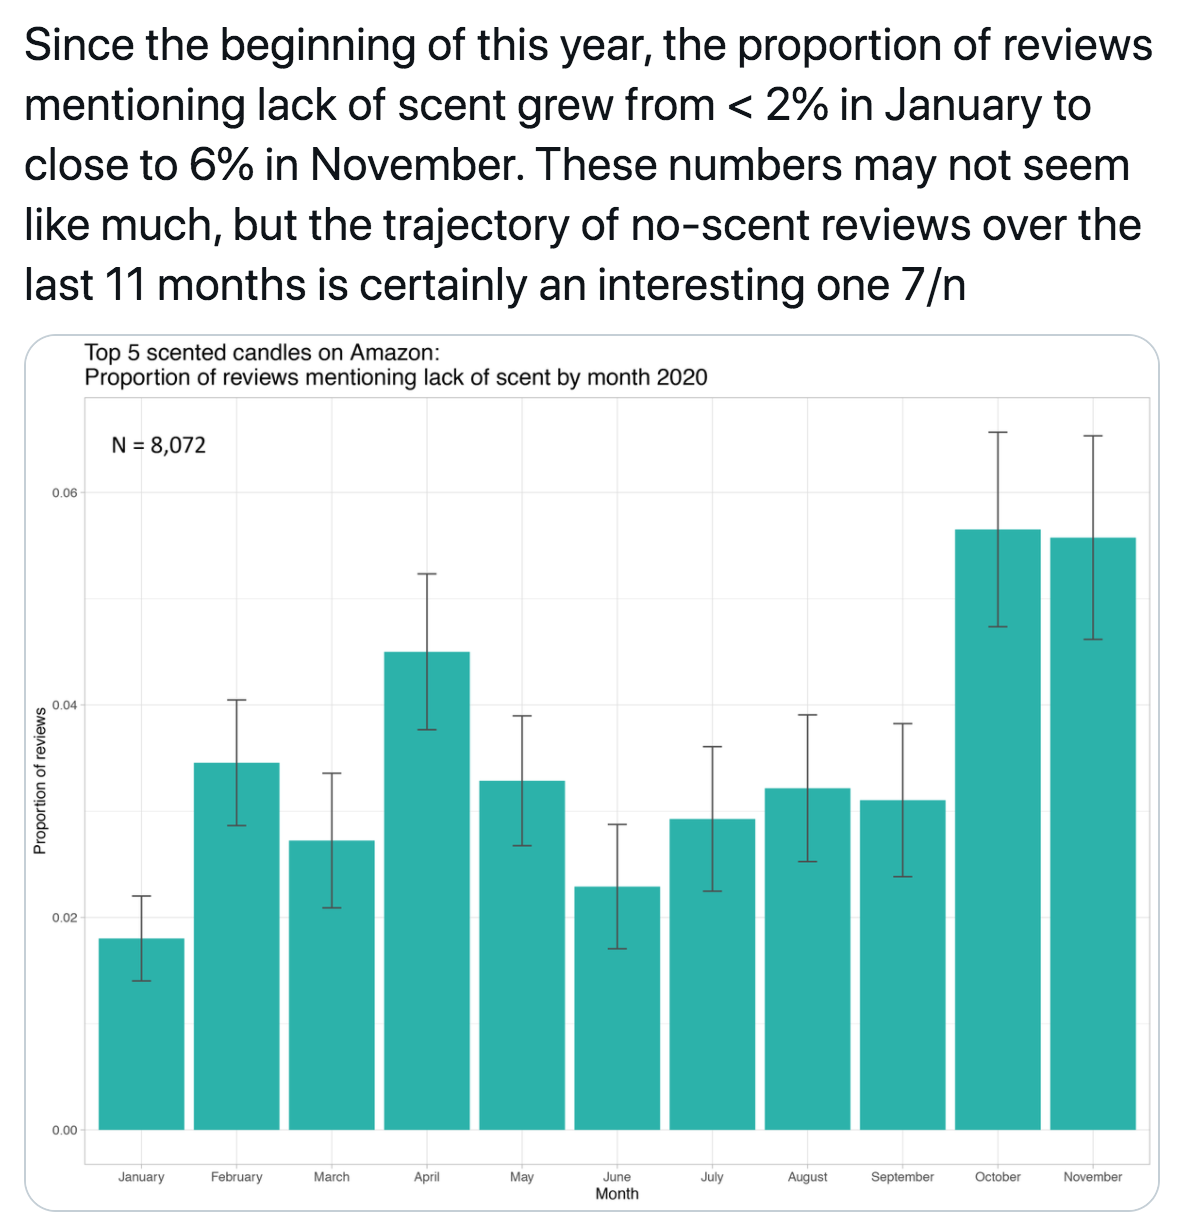 plot - Since the beginning of this year, the proportion of reviews mentioning lack of scent grew from